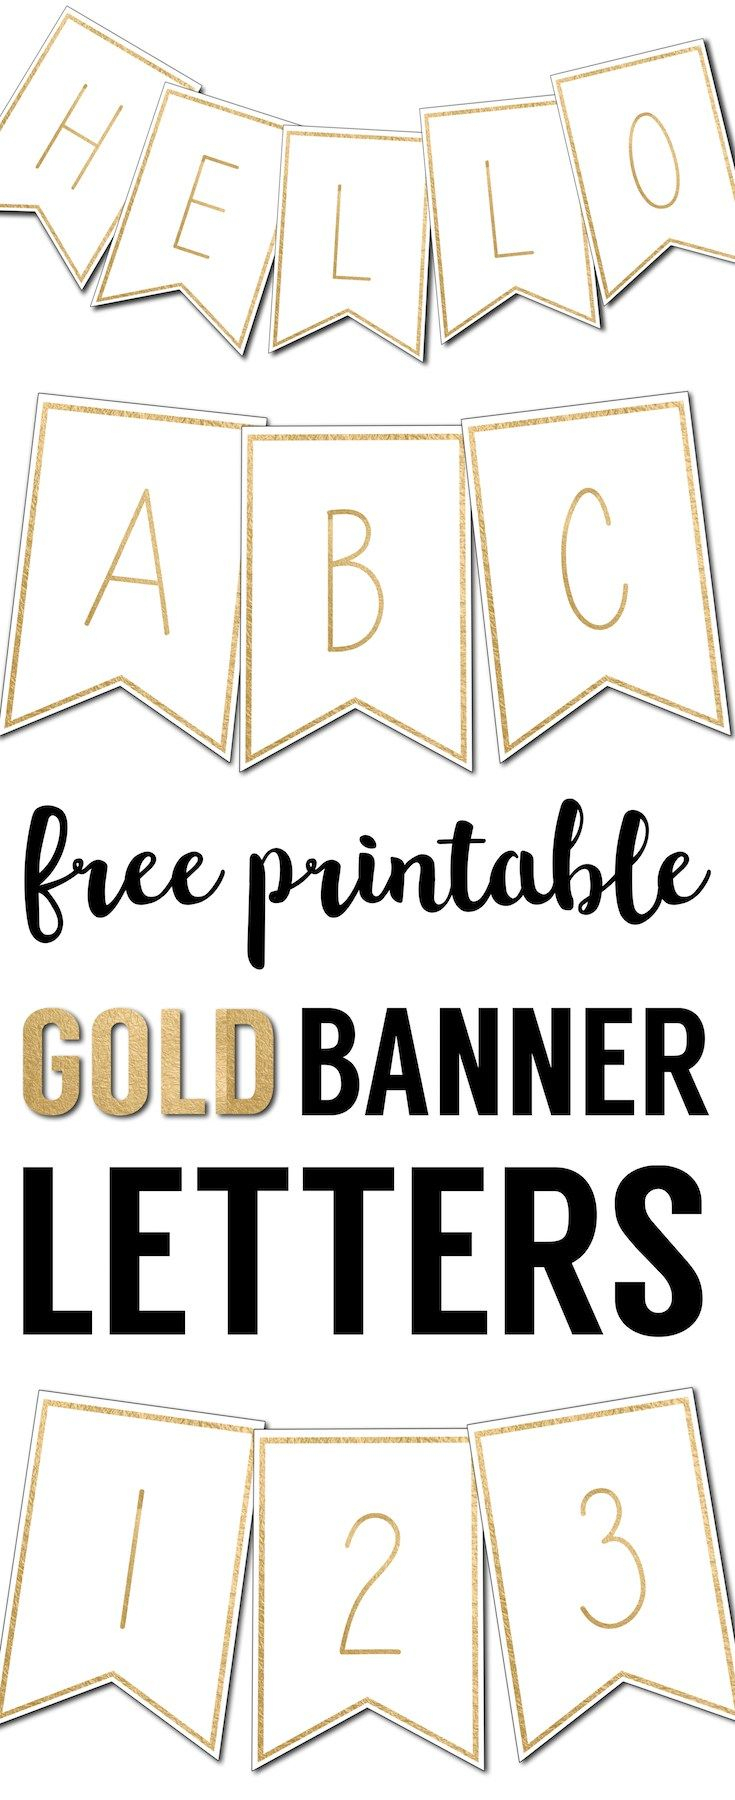 Free Printable Banner Letters Templates | Free Printable Pertaining To Letter Templates For Banners